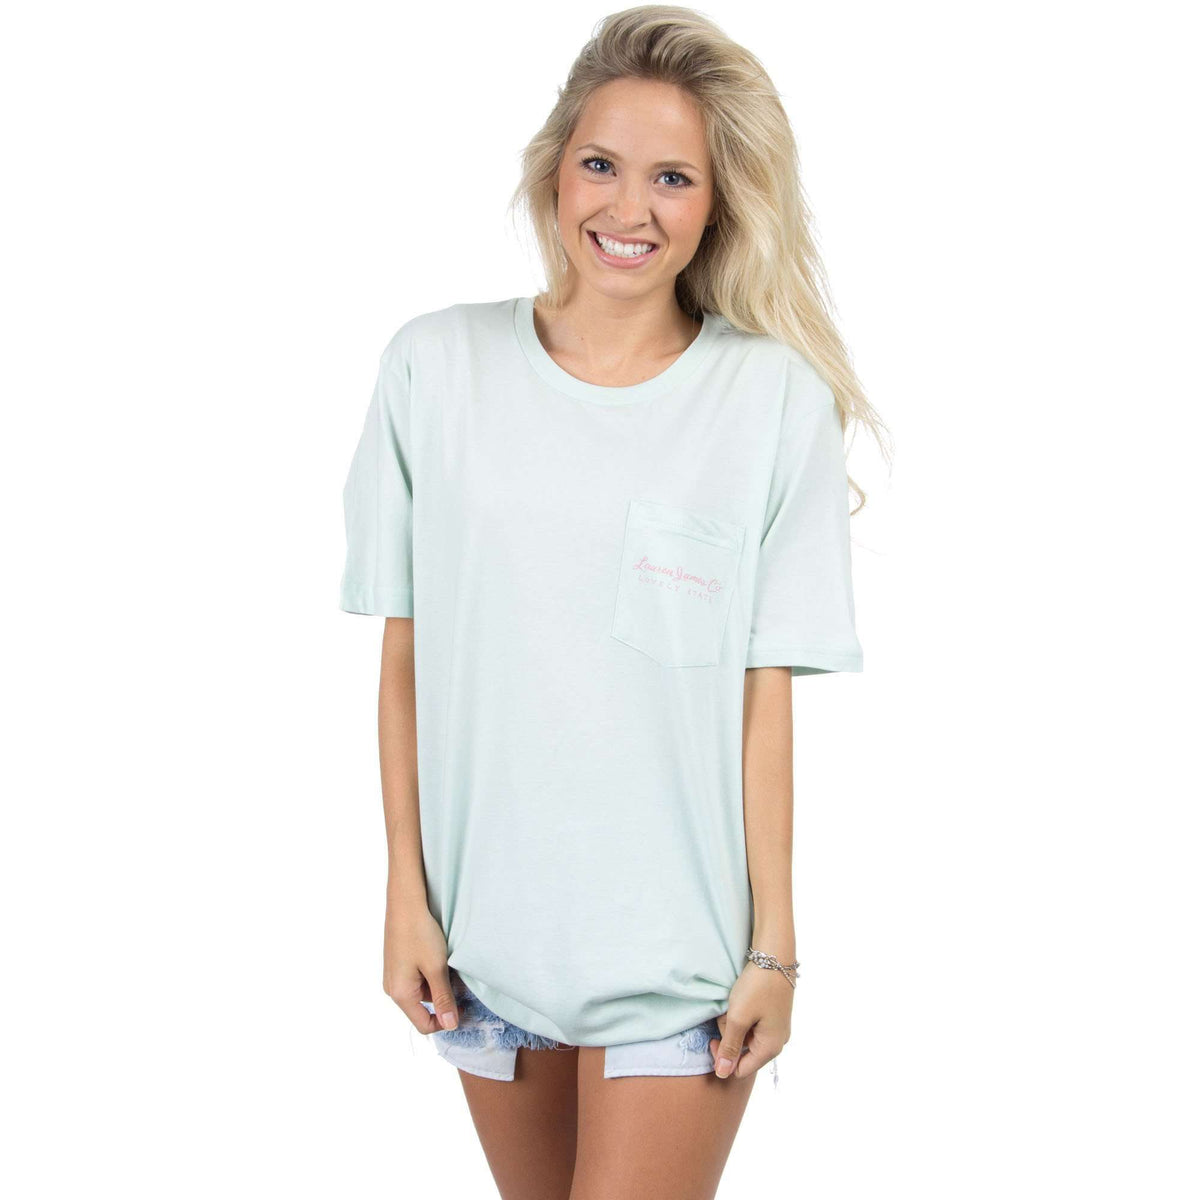 Love Me Some Alabama Tee in Mint by Lauren James - Country Club Prep